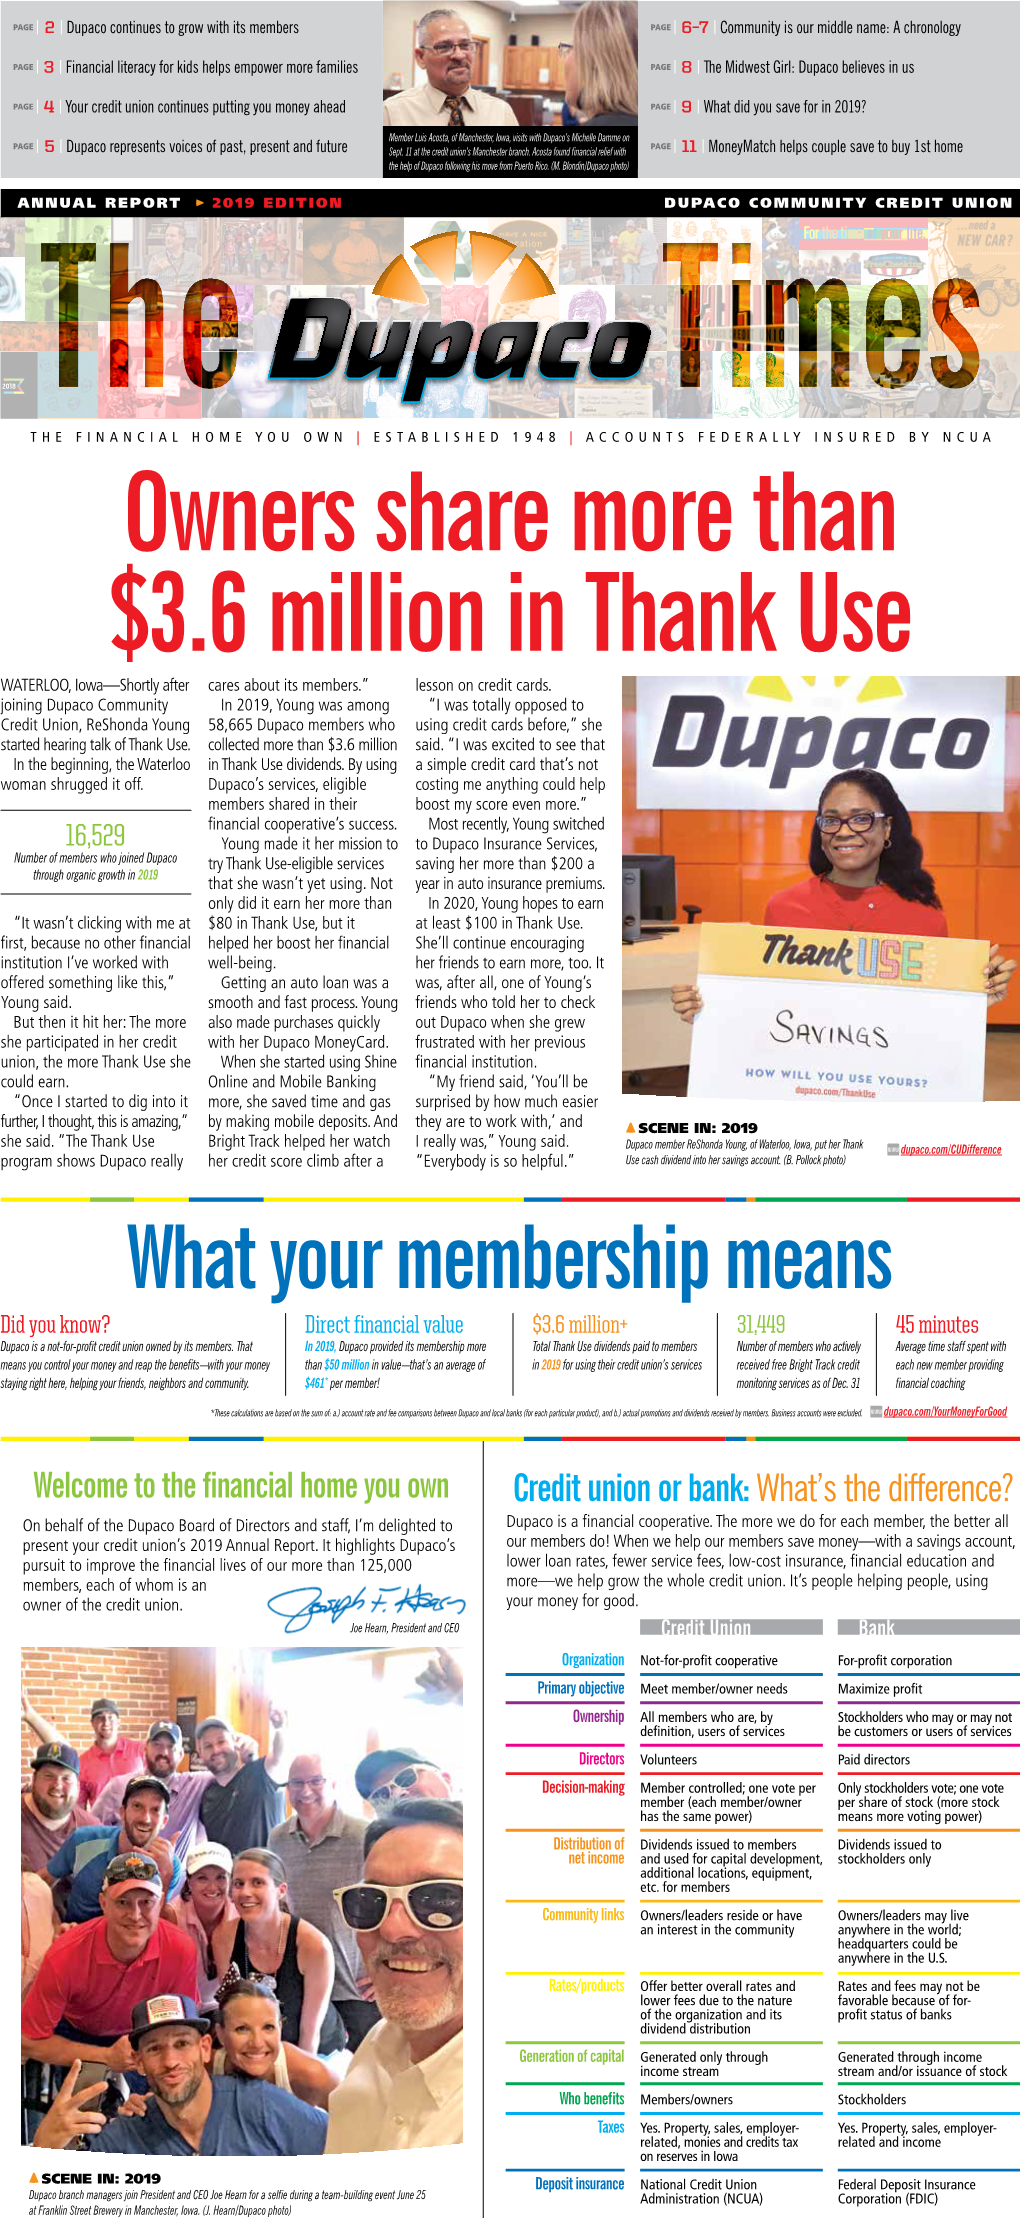 2019 Dupaco Times Annual Report